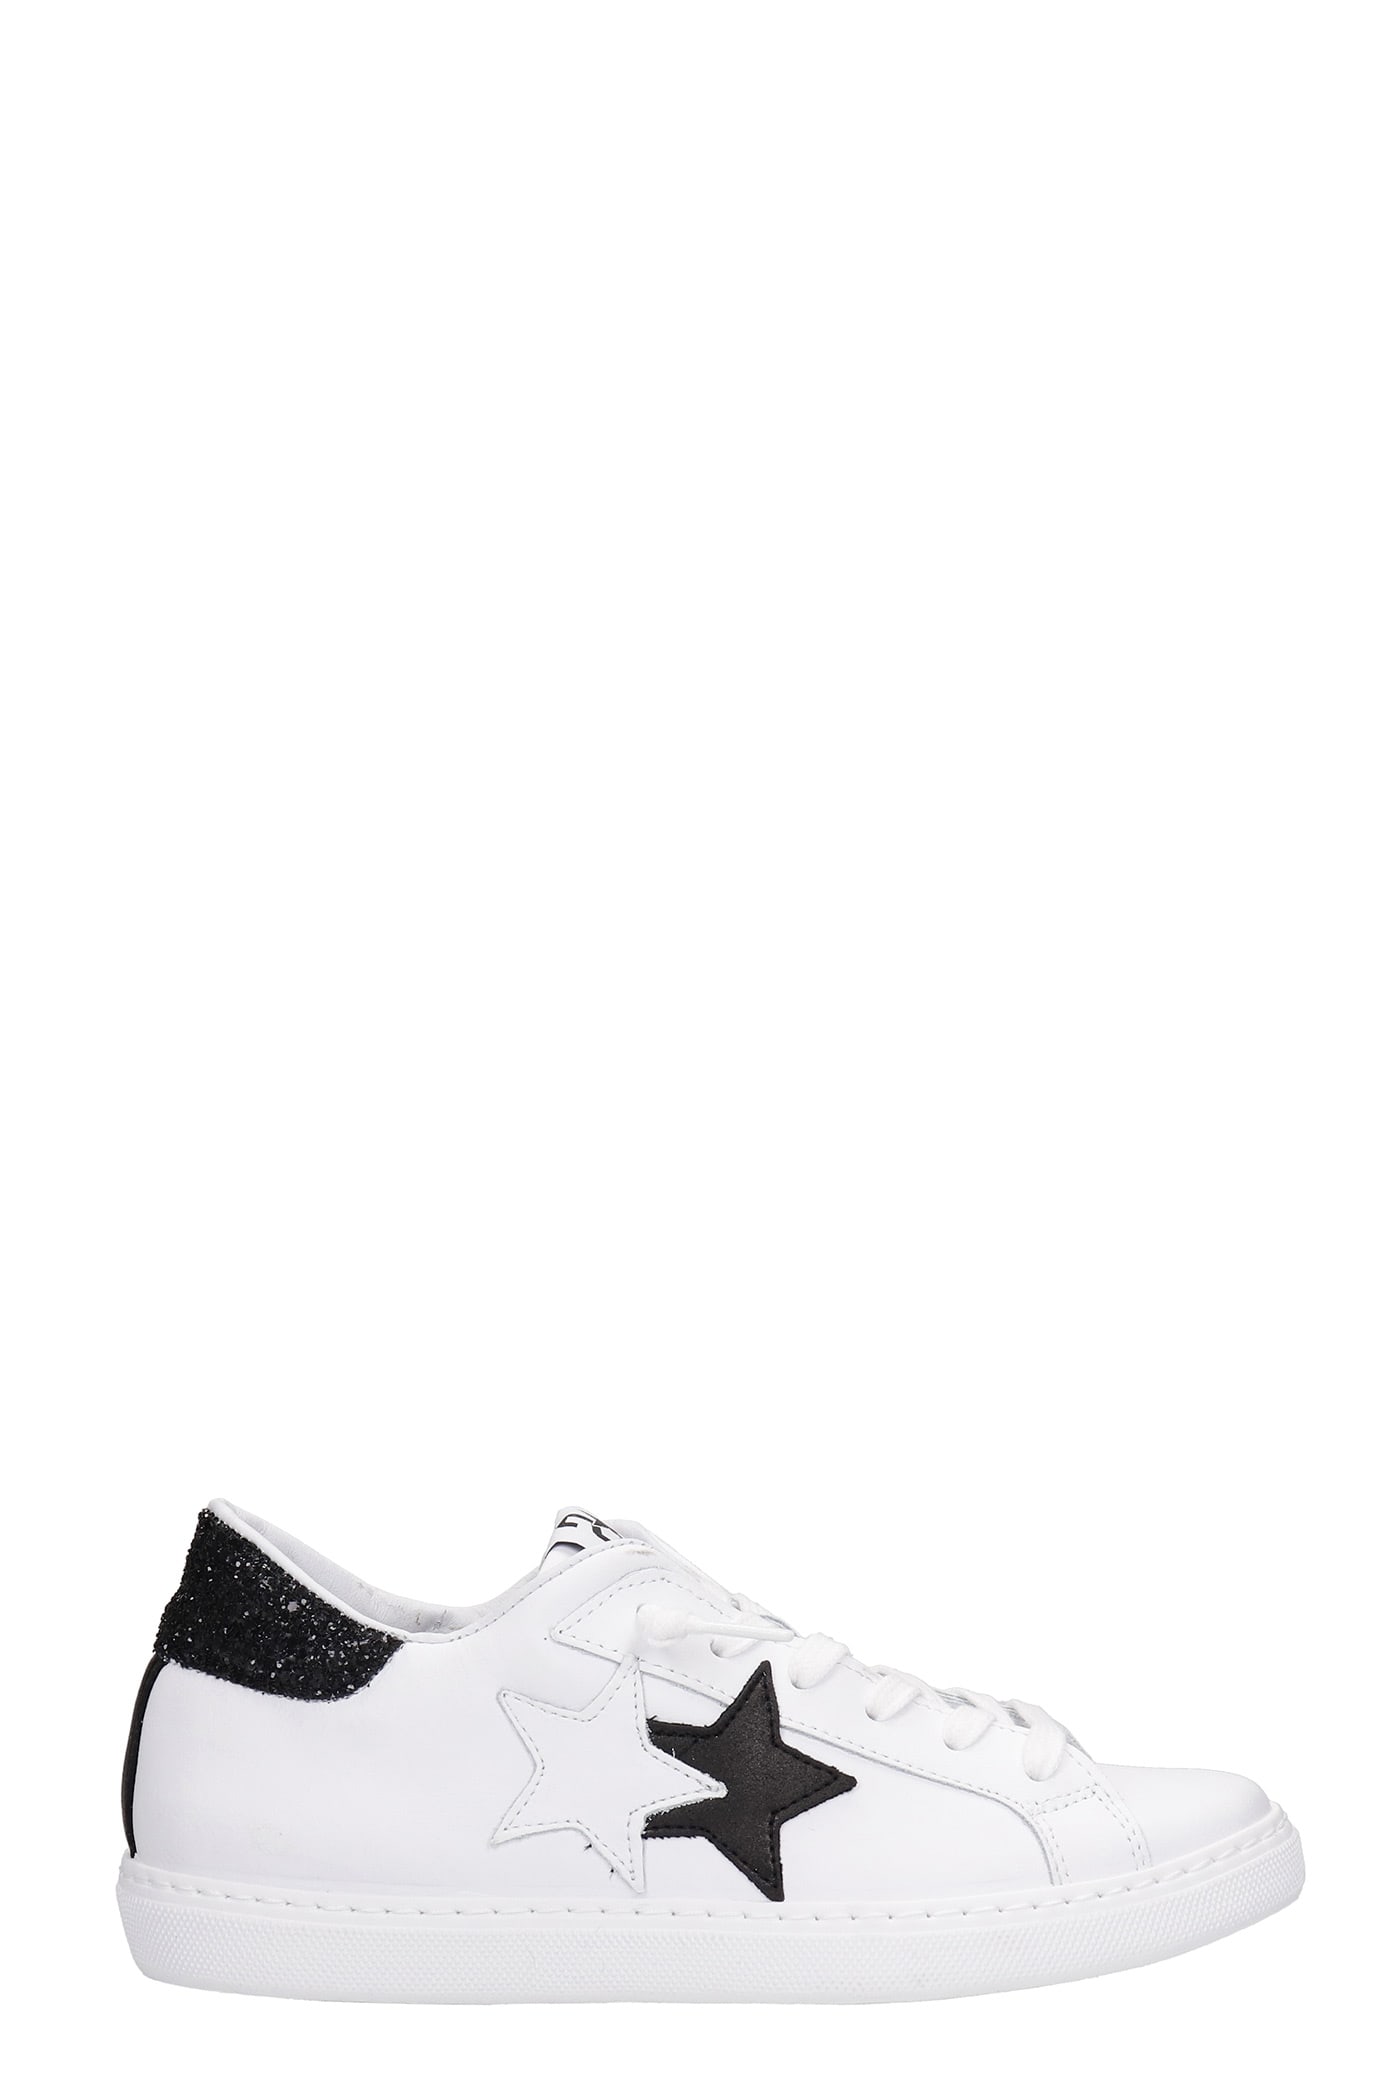 Sneakers In White Leather 2Star